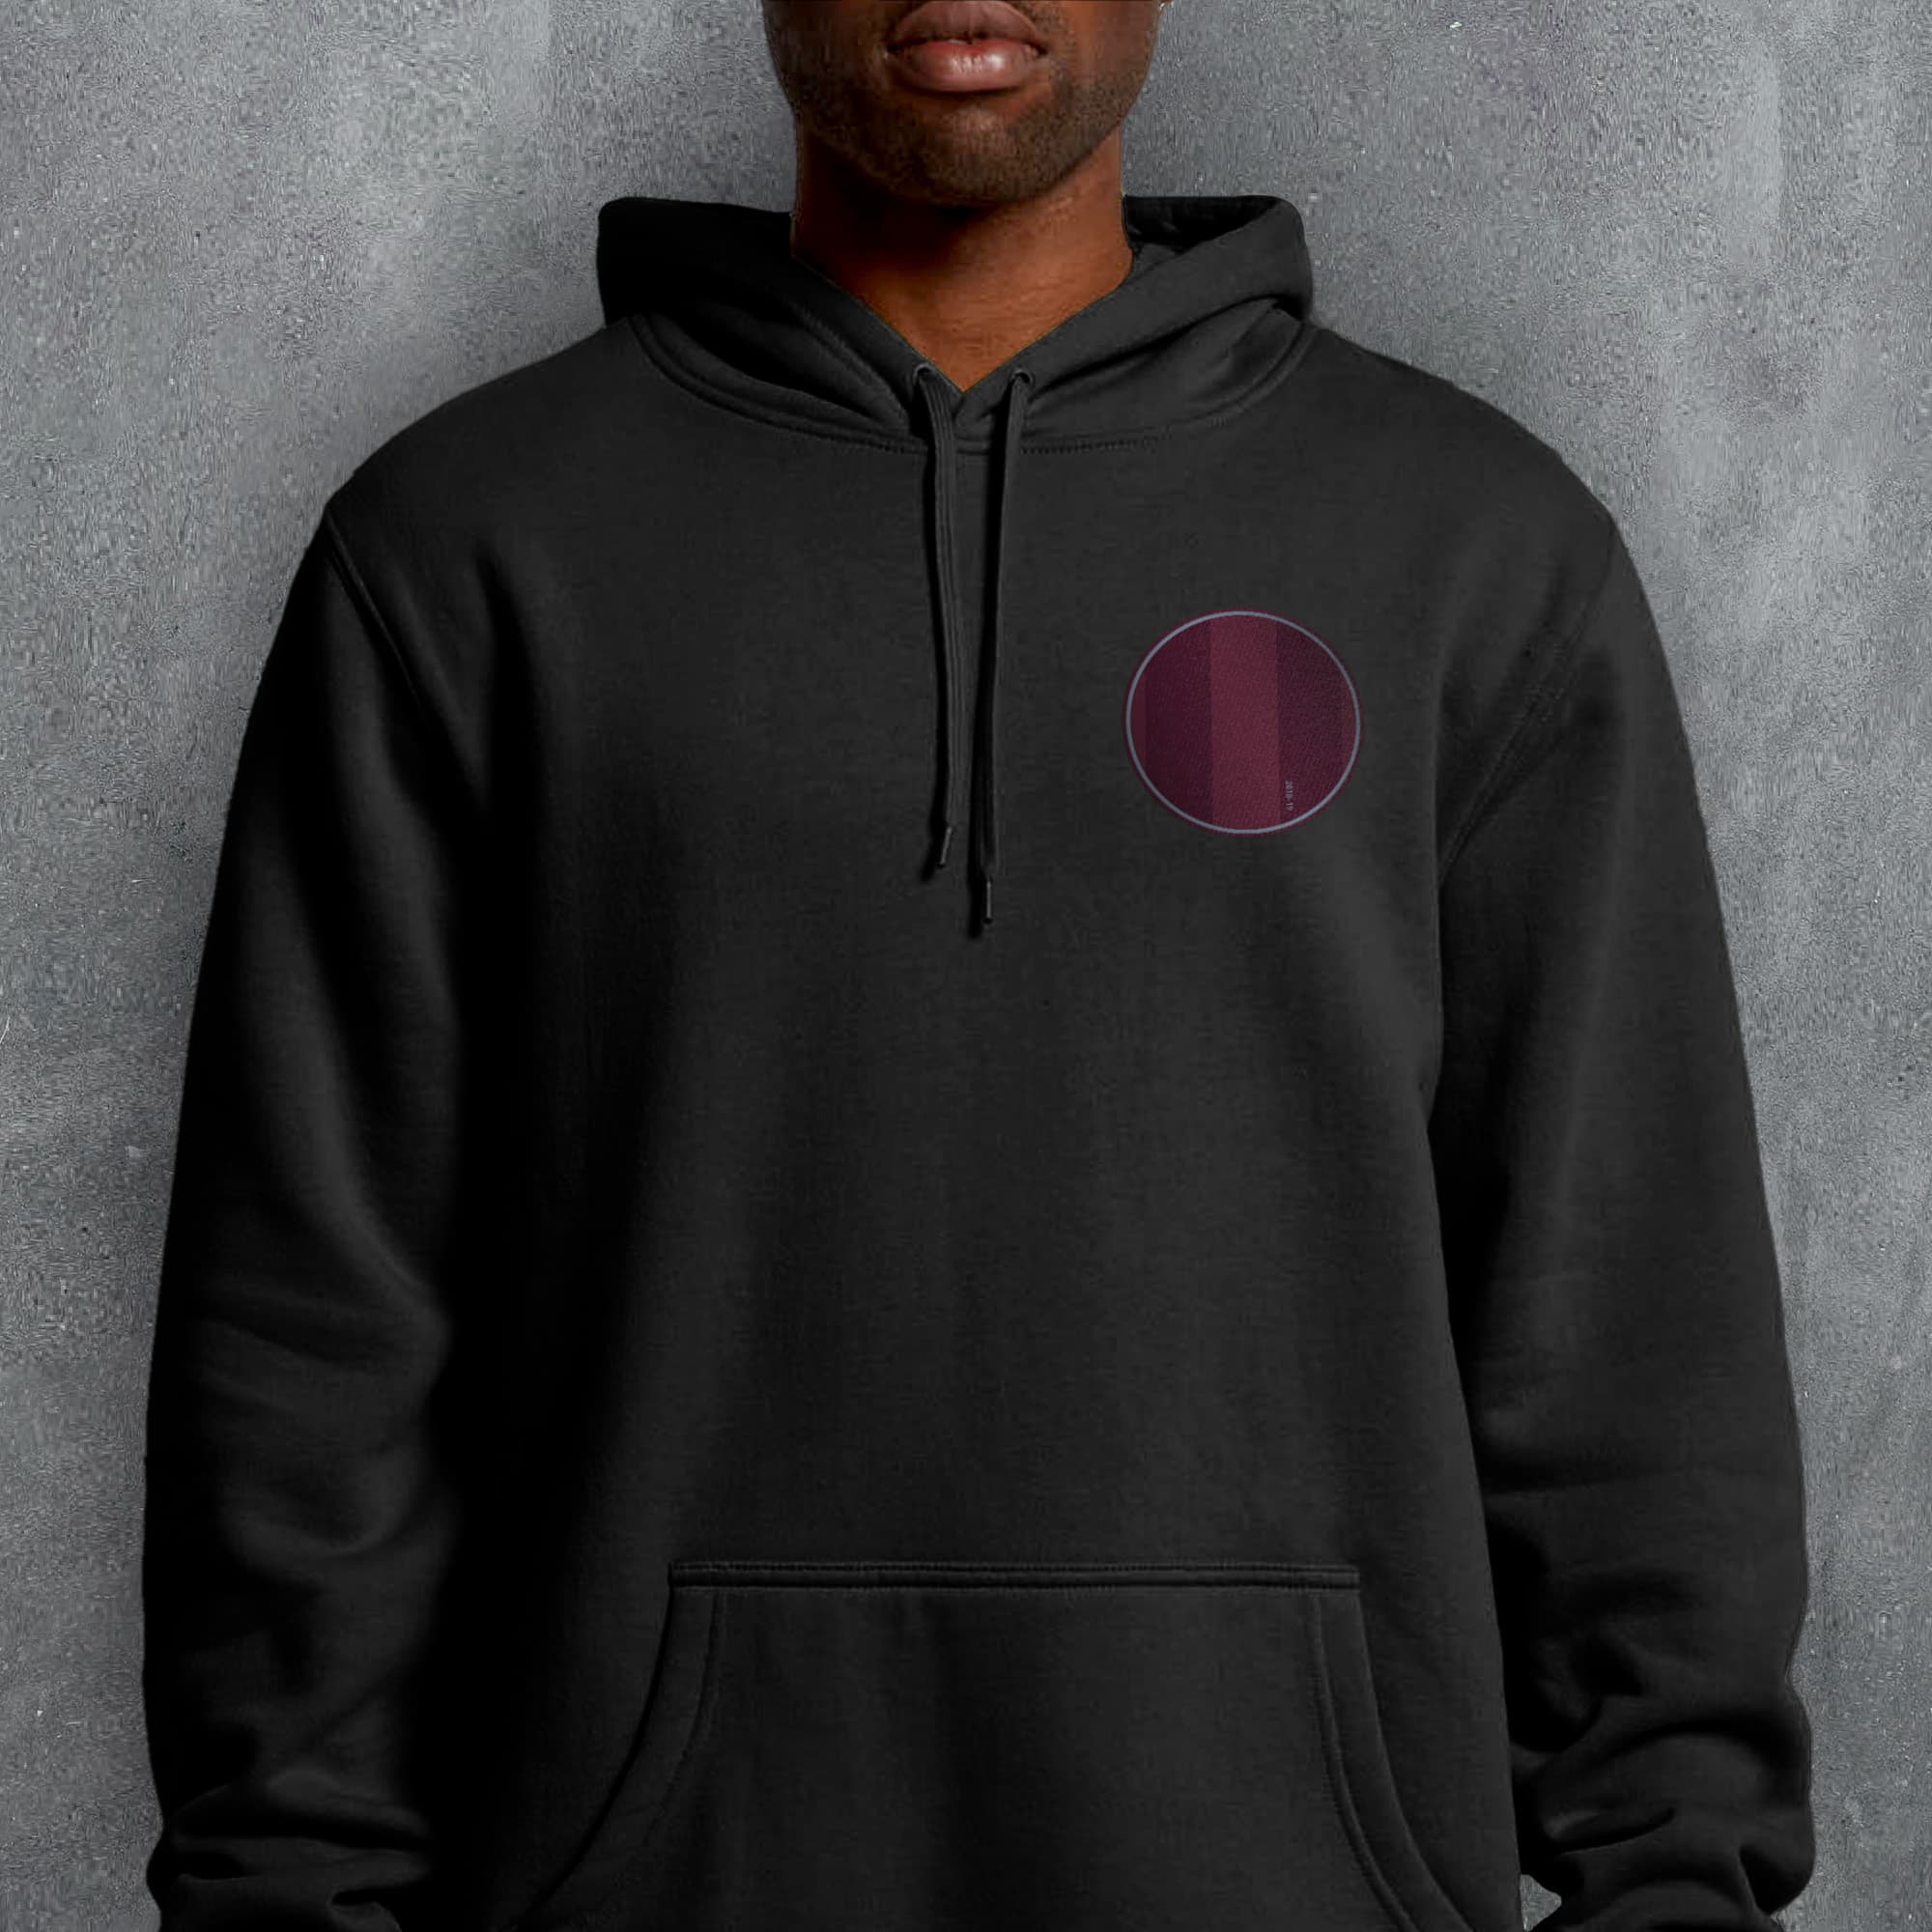 a man wearing a black hoodie with a maroon circle on it